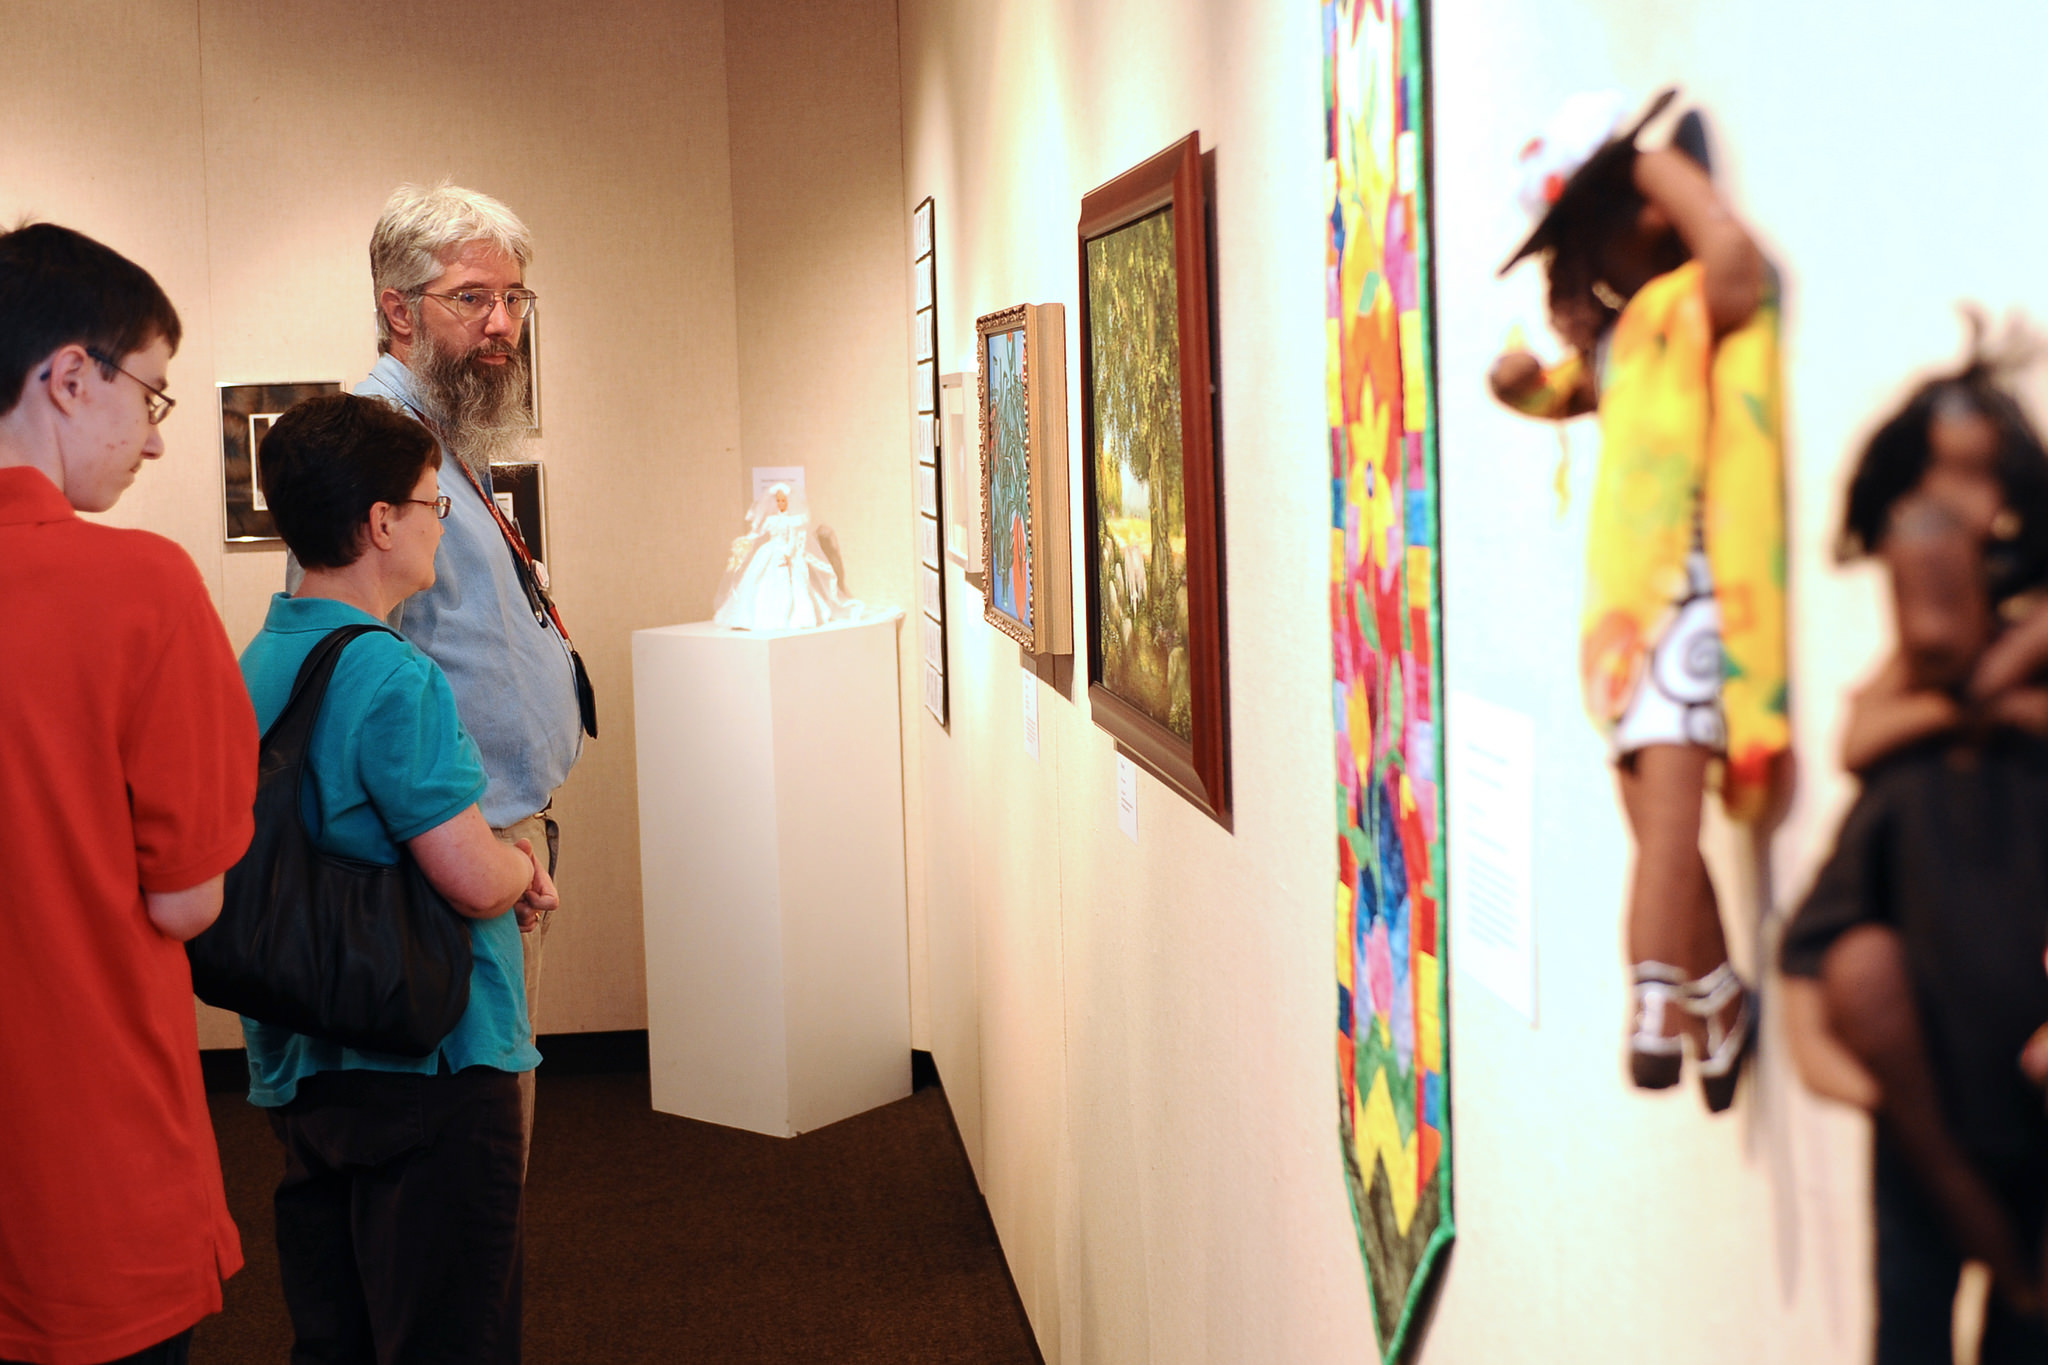 The annual Open Walls faculty/staff art exhibit runs from June 13-30.